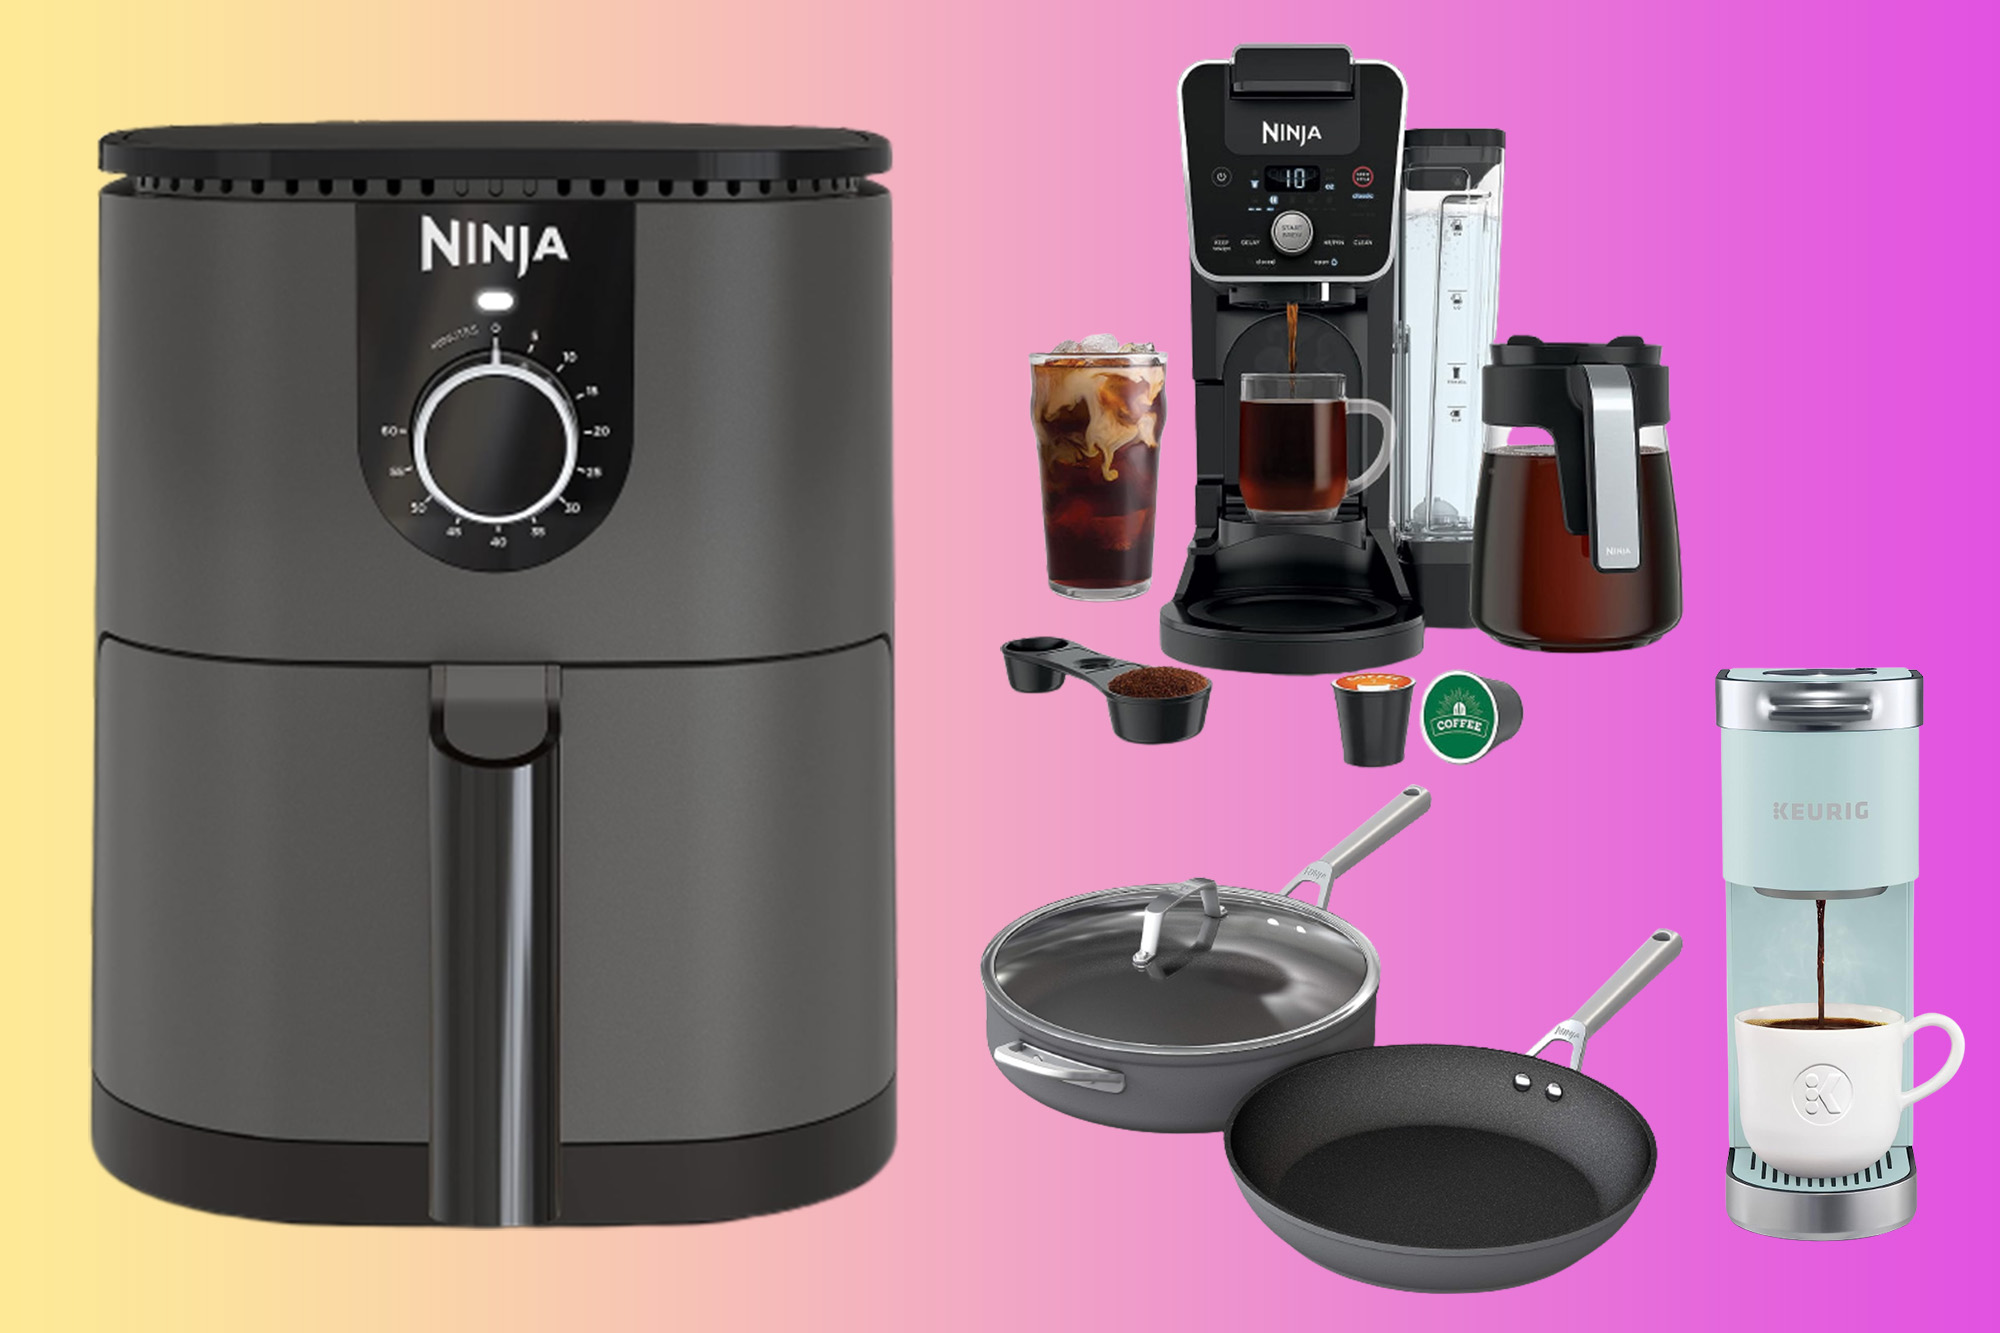 slashed the price of this Ninja Mini Air Fryer by 50%